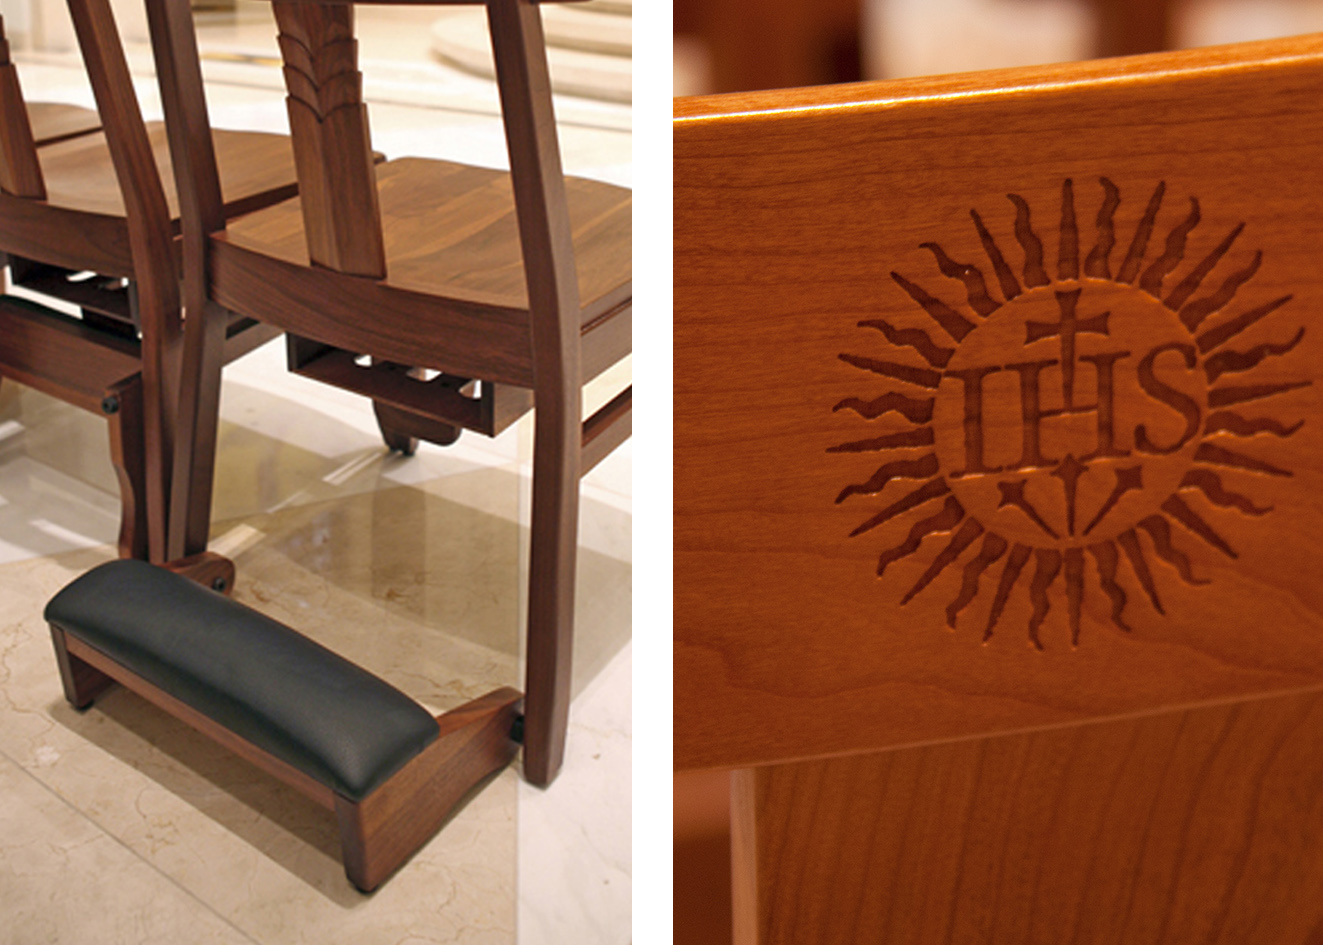 Custom designed chairs for cathedrals and churches